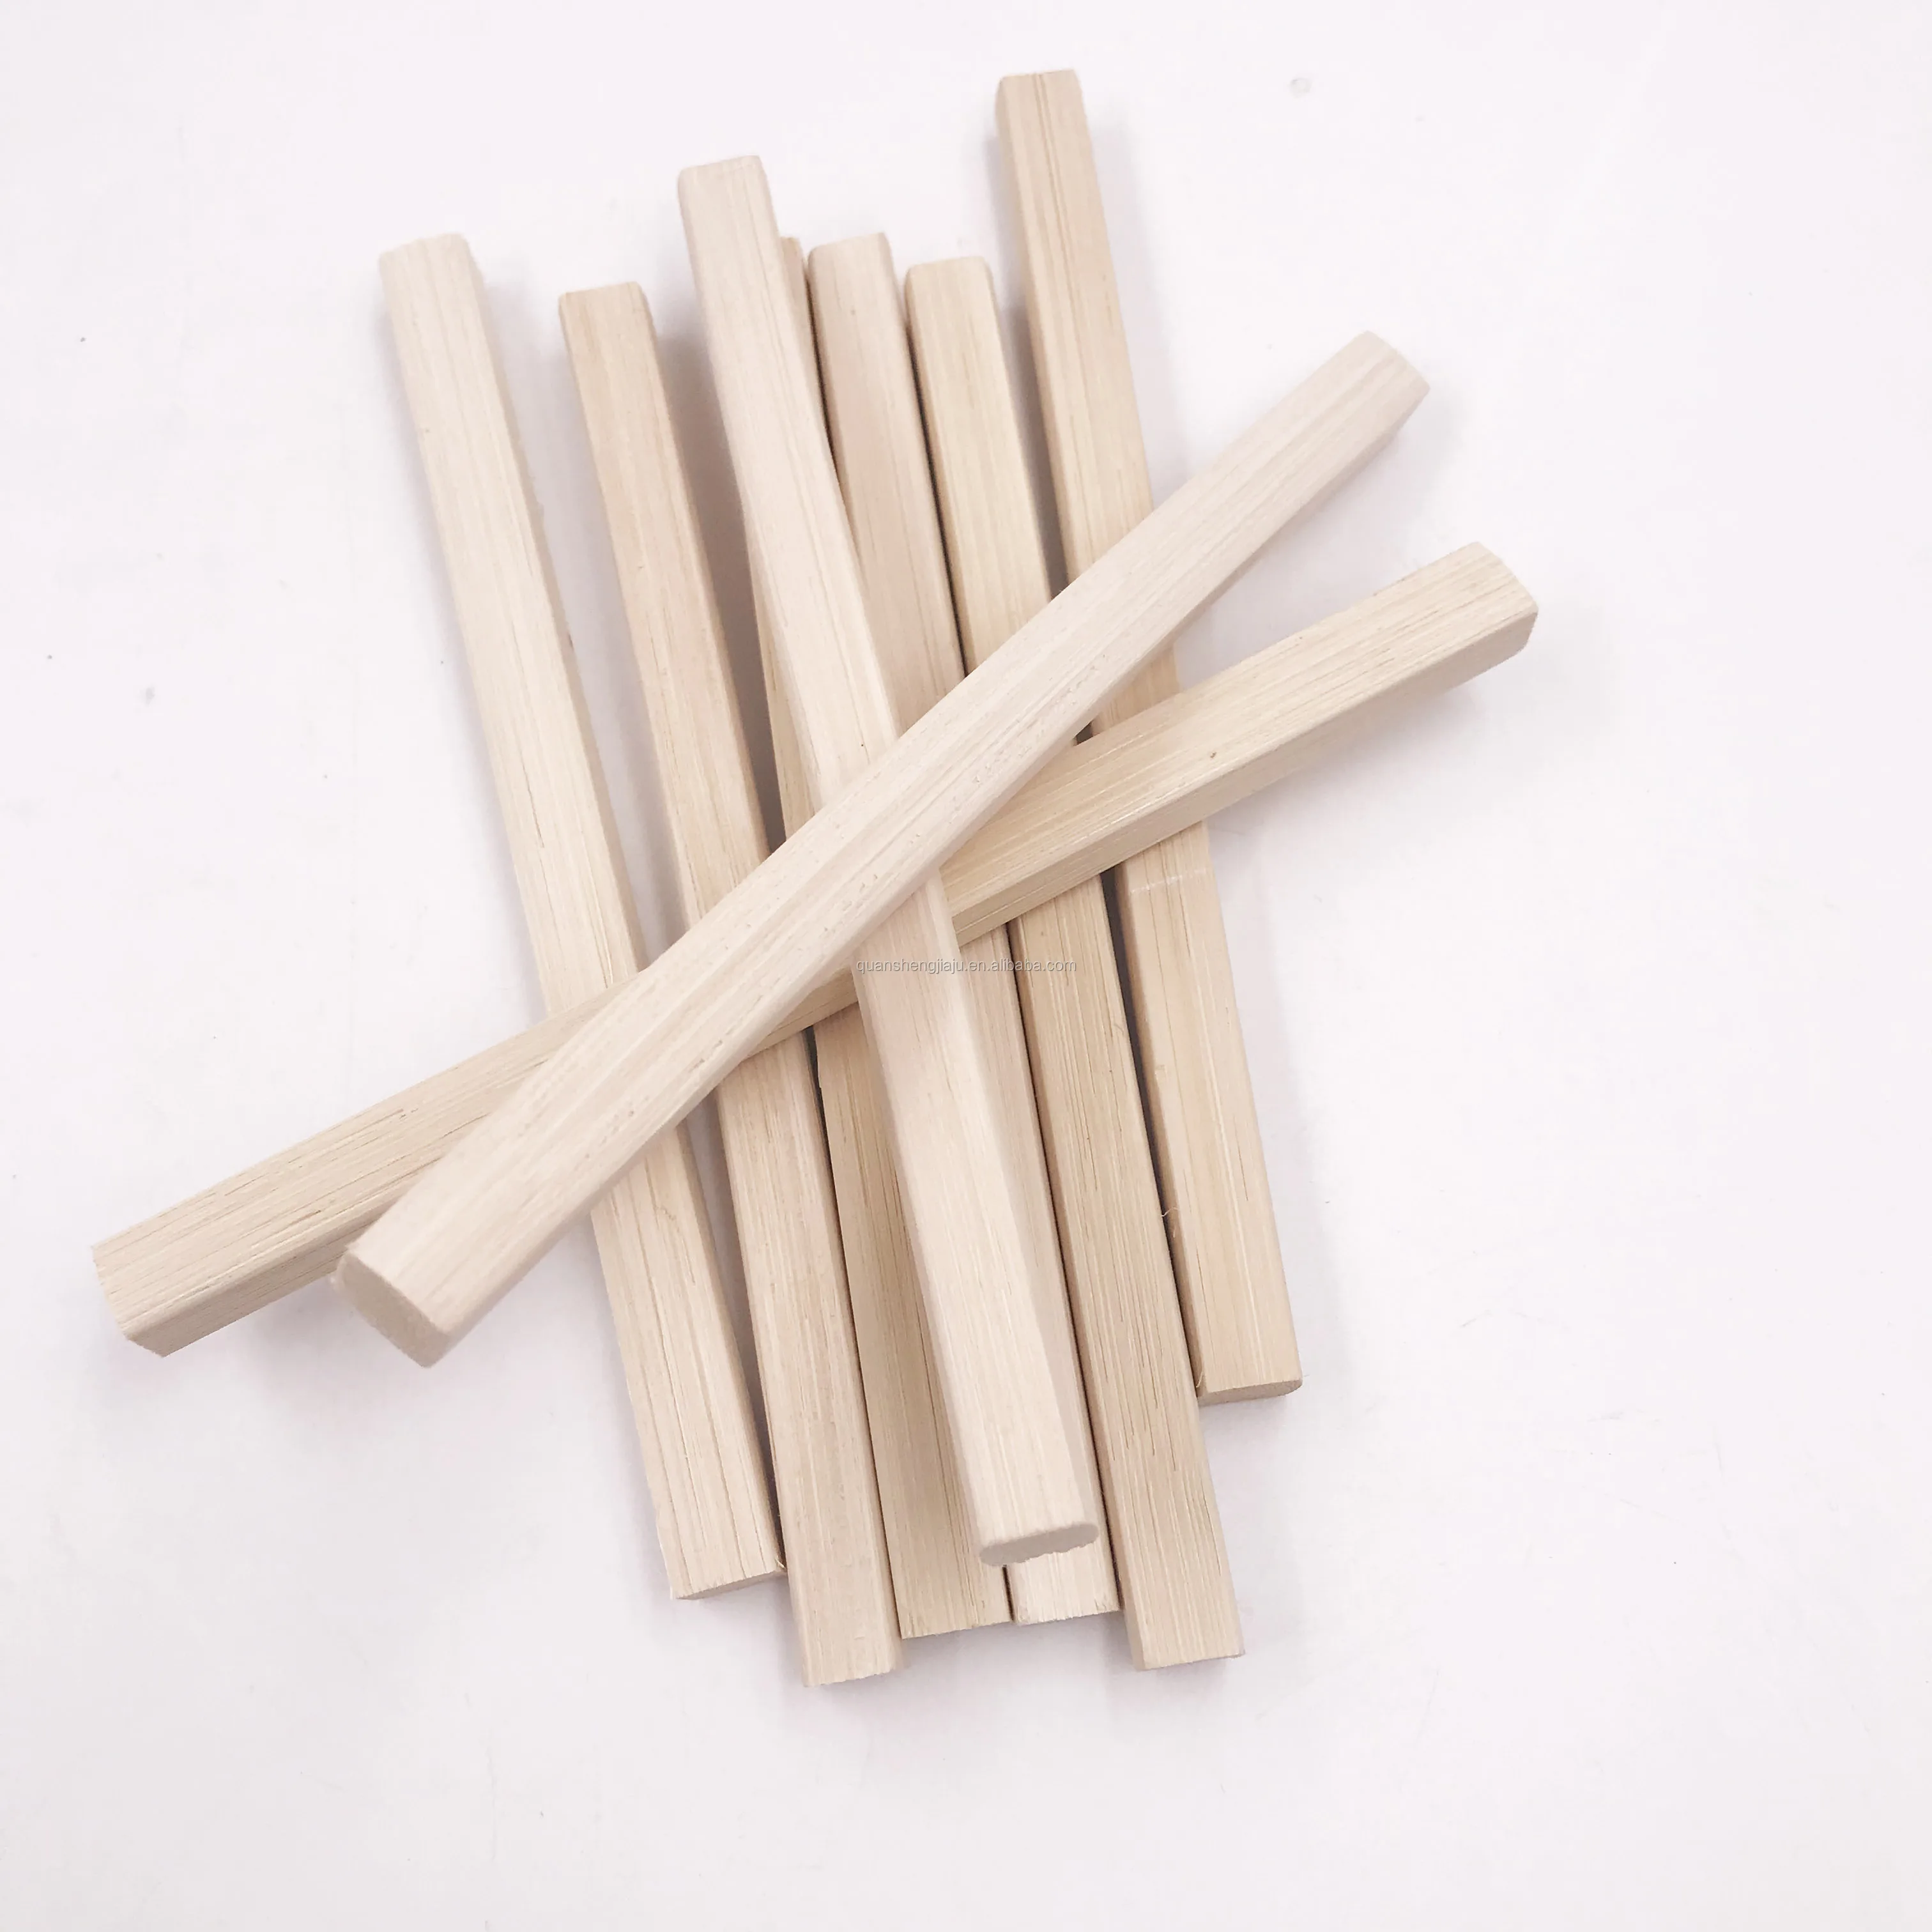 Oblong-shaped Rattan Reed Diffuser Stick Natural Color ...